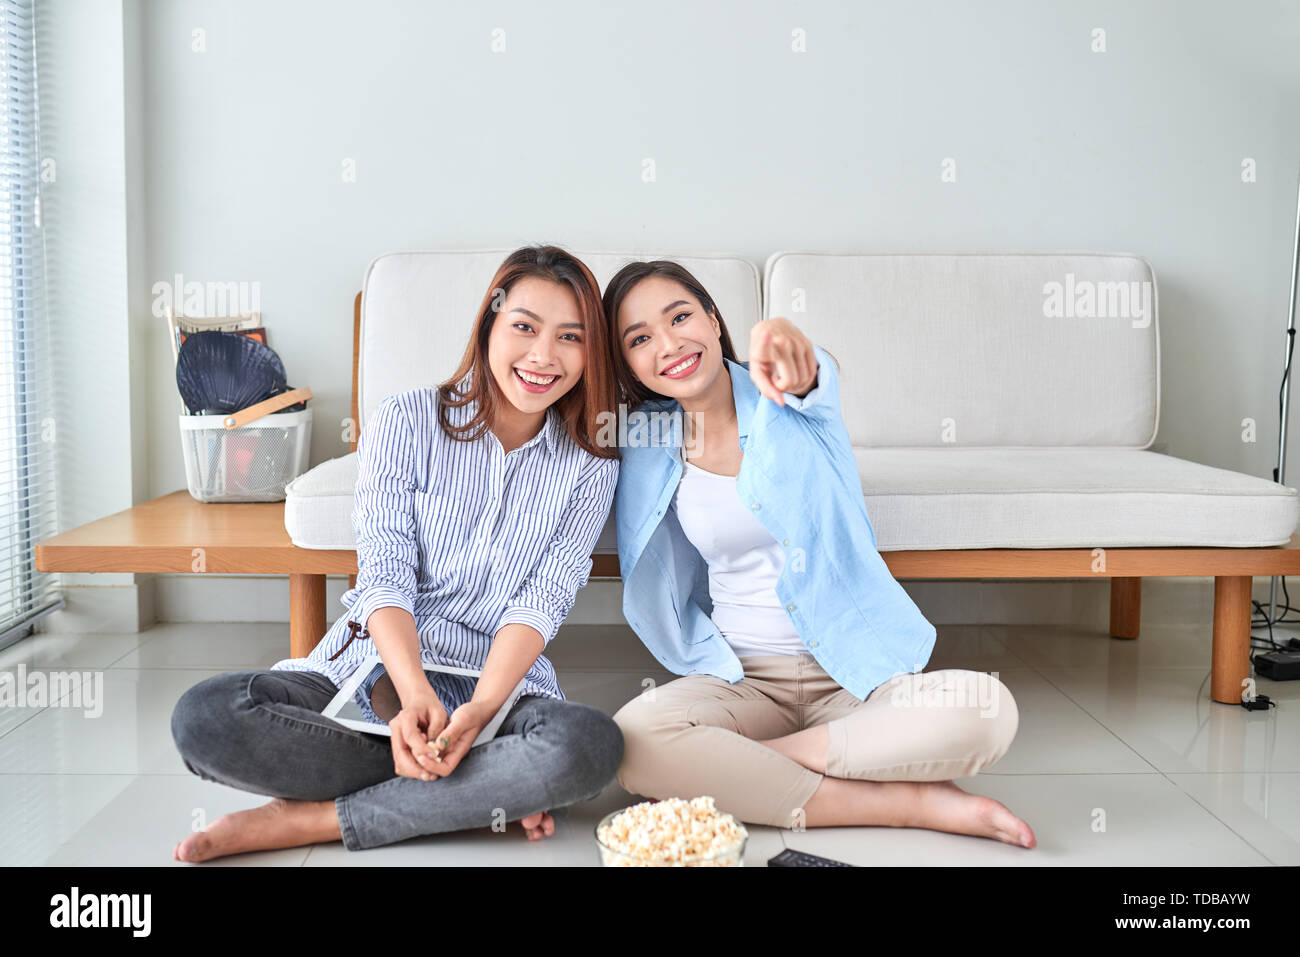 Wondered amazed impressed girl gesturing forefinger eating popcorn watching funny comic program with her friend sitting in living room indoor enjoying Stock Photo